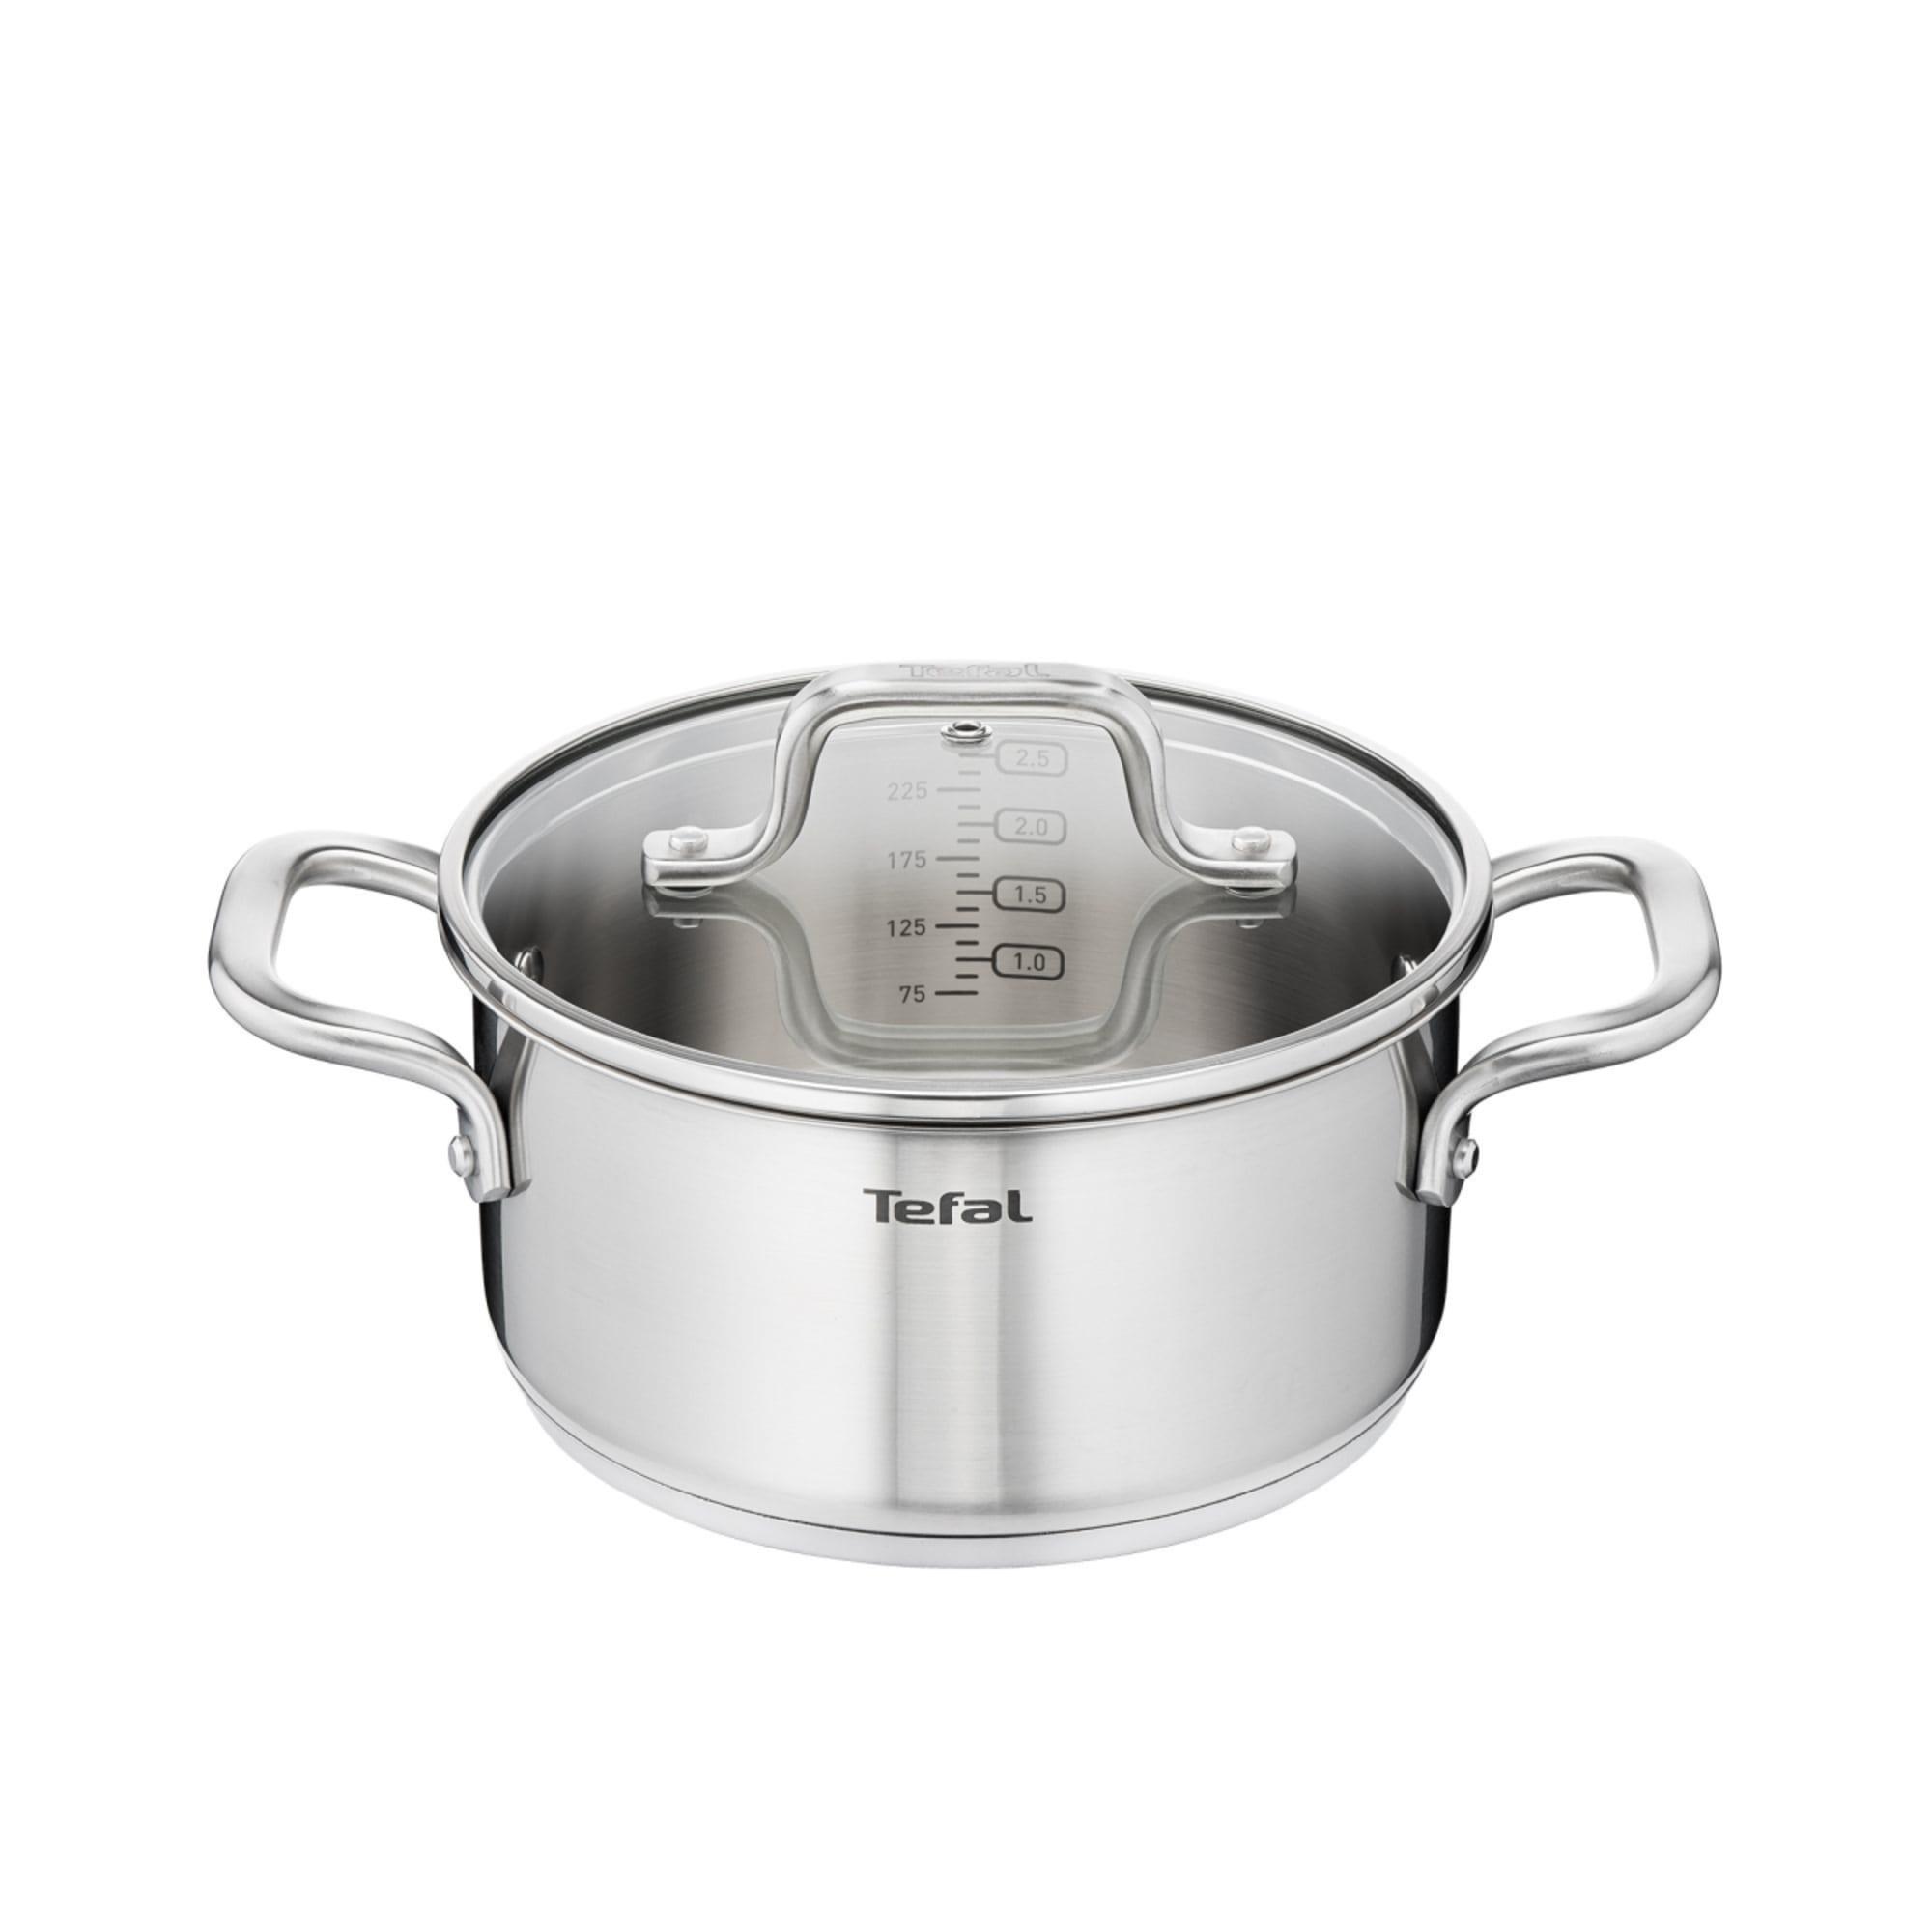 Tefal Virtuoso 3pc Stainless Steel Cookware Set Image 5